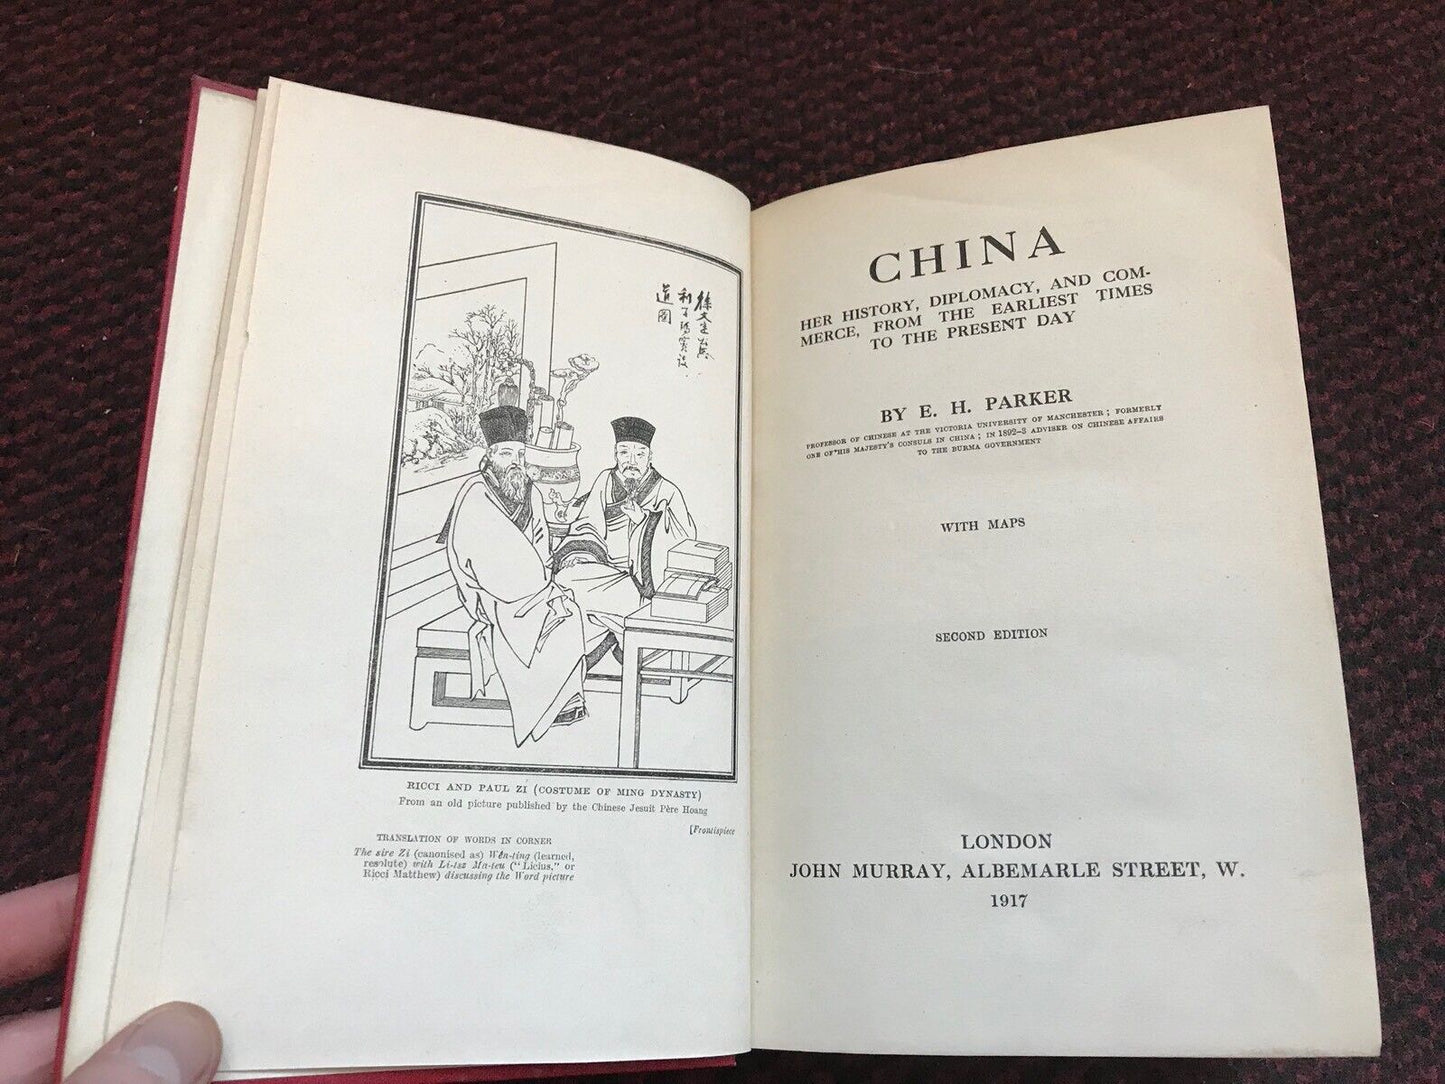 1917 - CHINA - Her History, Diplomacy and Commerce - E H Parker CHINESE Maps